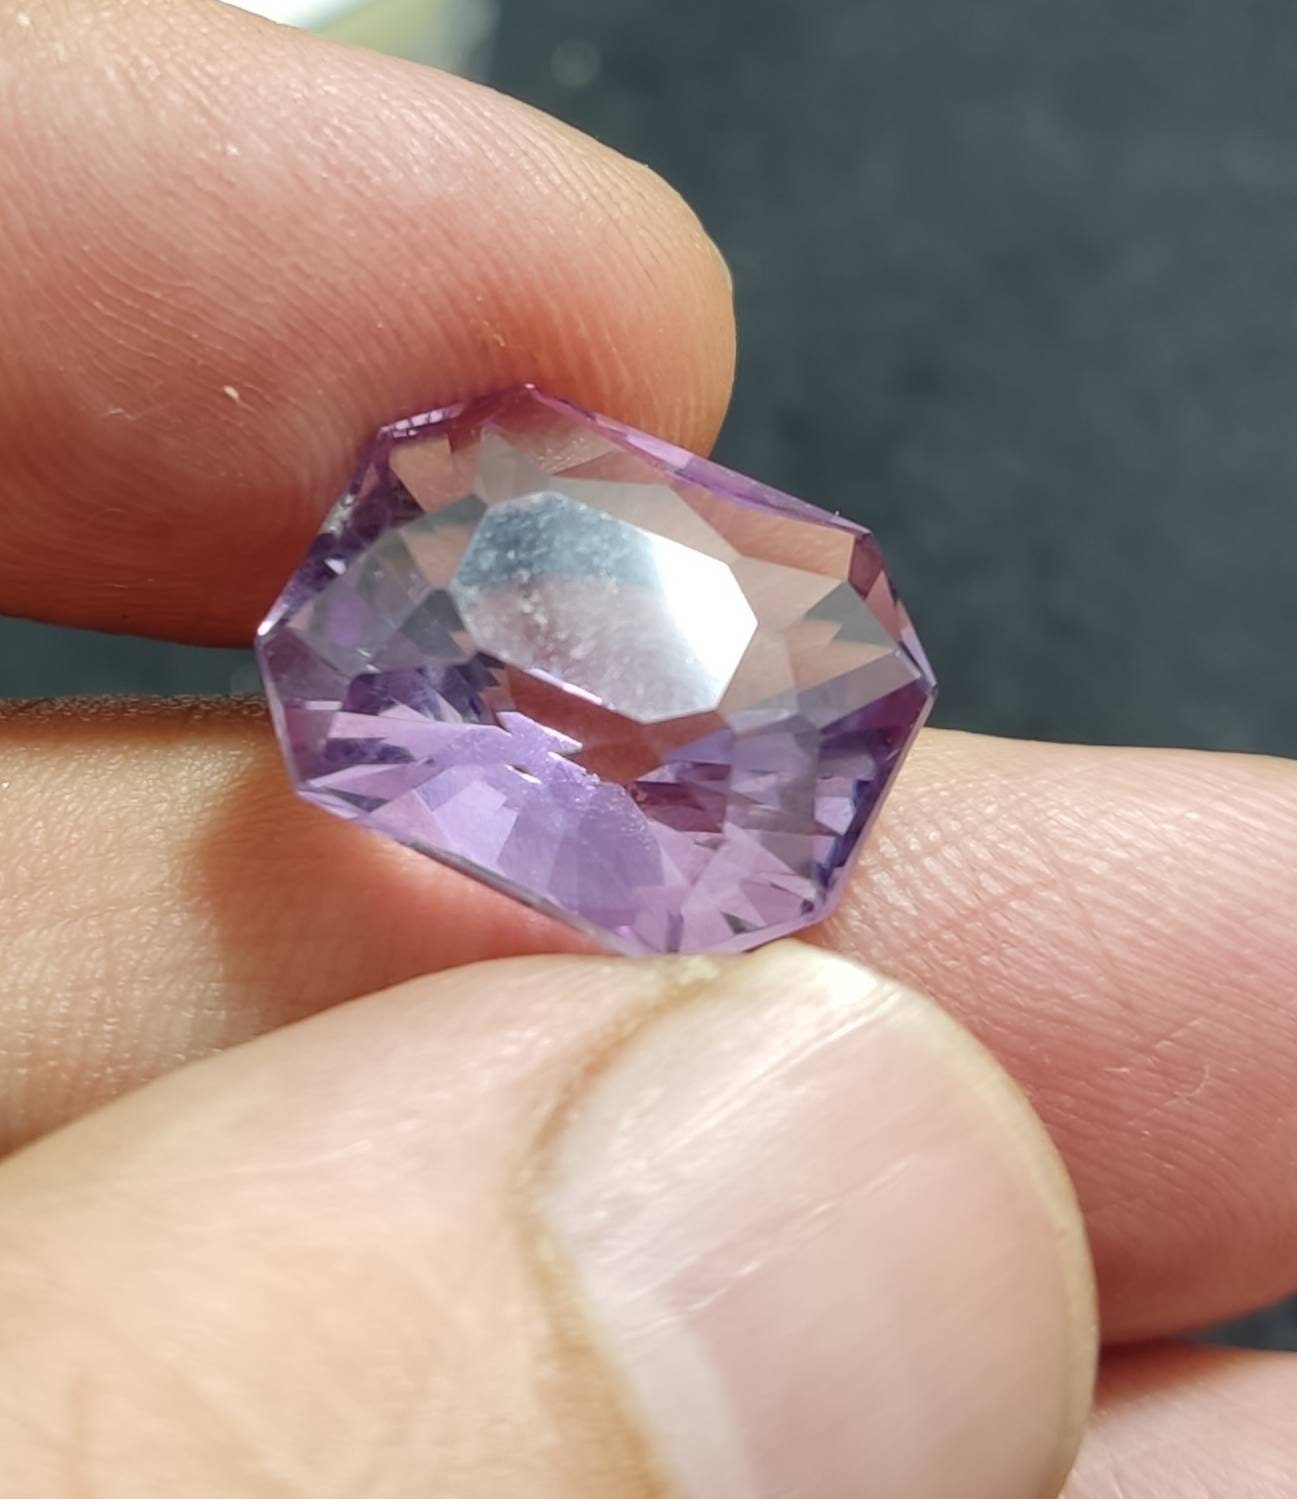 An amazing faceted modified emerald cut amethyst gemstone 13 carats